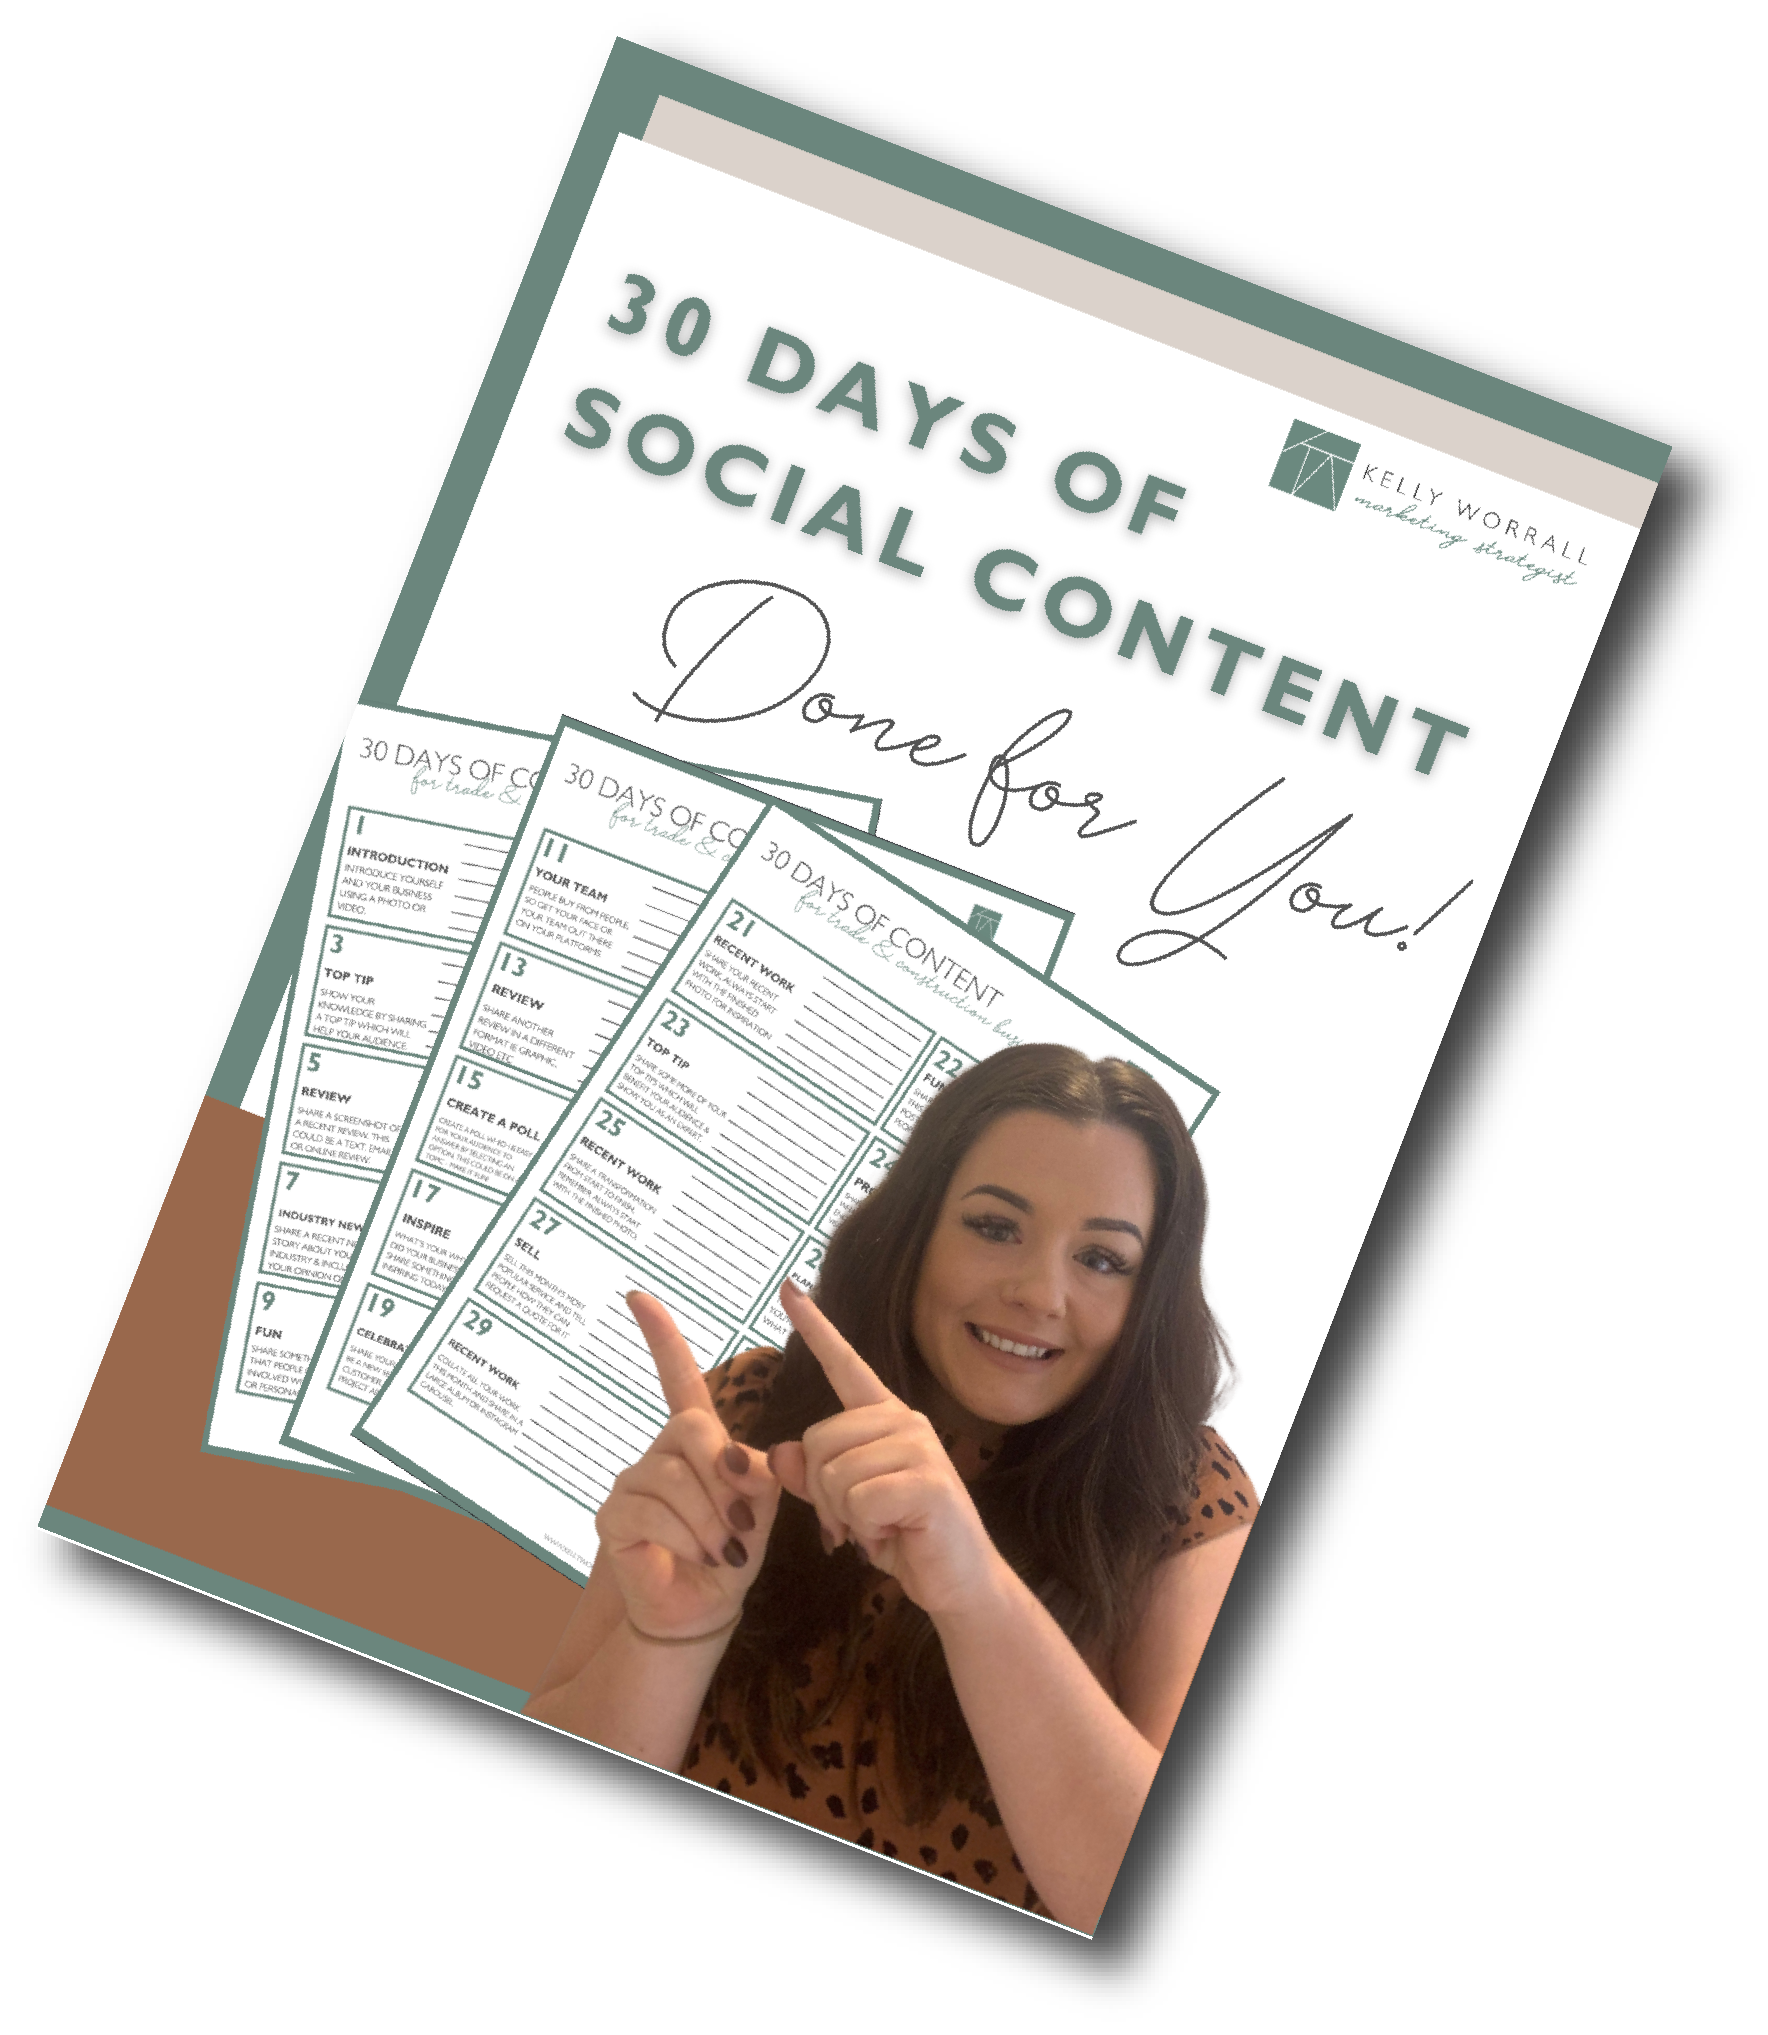 30 days of social content